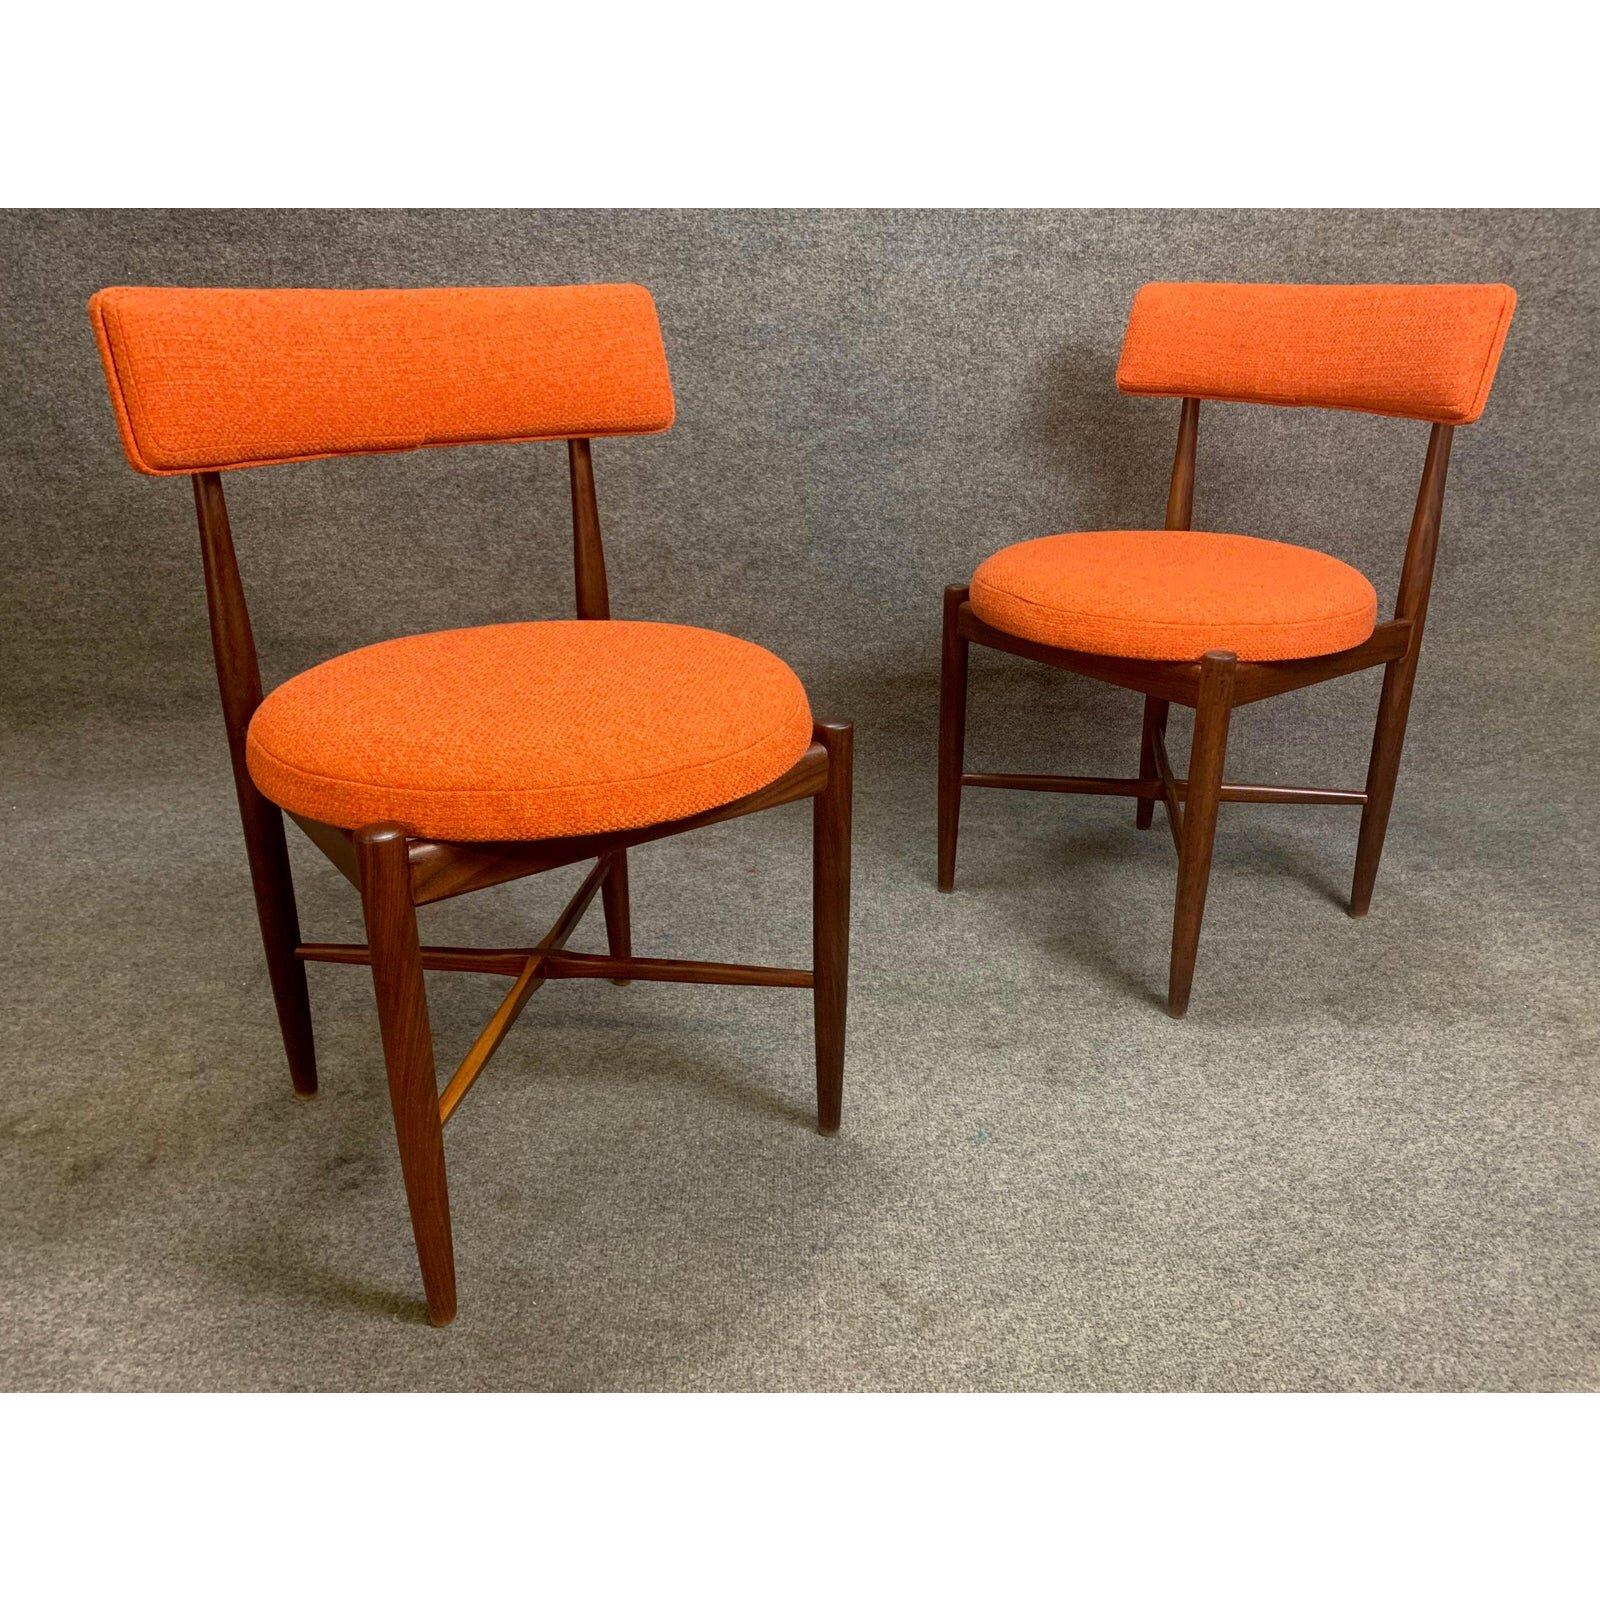 Here is an exquisite set of two vintage dining chairs in teak wood designed by Victor Wilkins and manufactured in England in the 1960s. These lovely and comfortable chairs set, recently imported form the UK to California before their restoration,